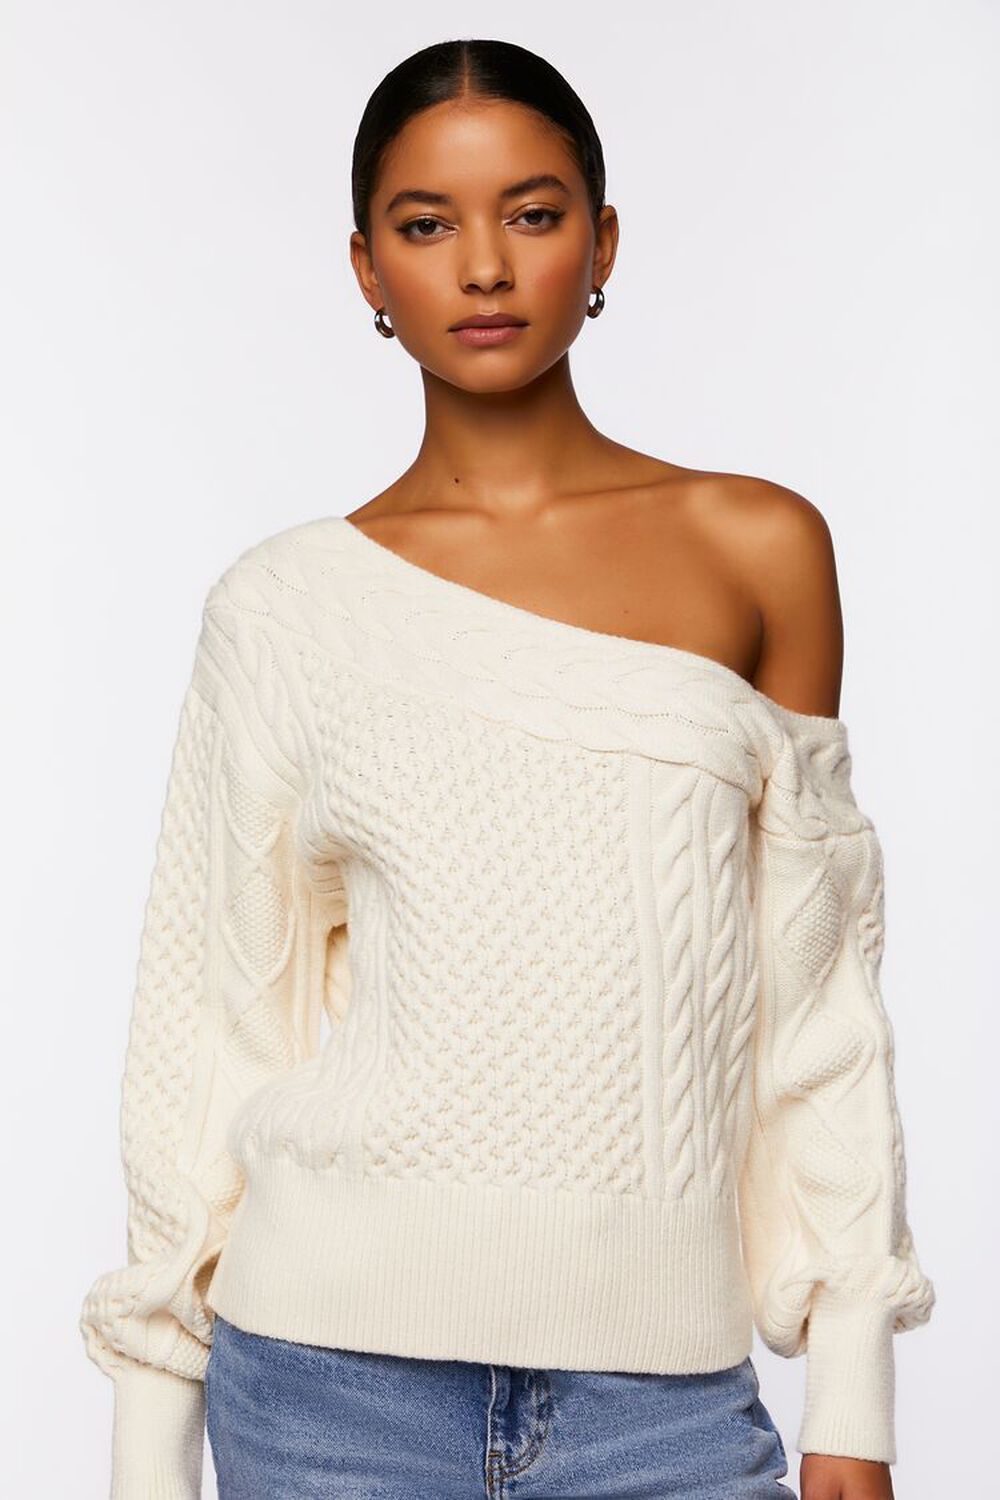 CREAM One-Shoulder Cable Knit Sweater, image 1